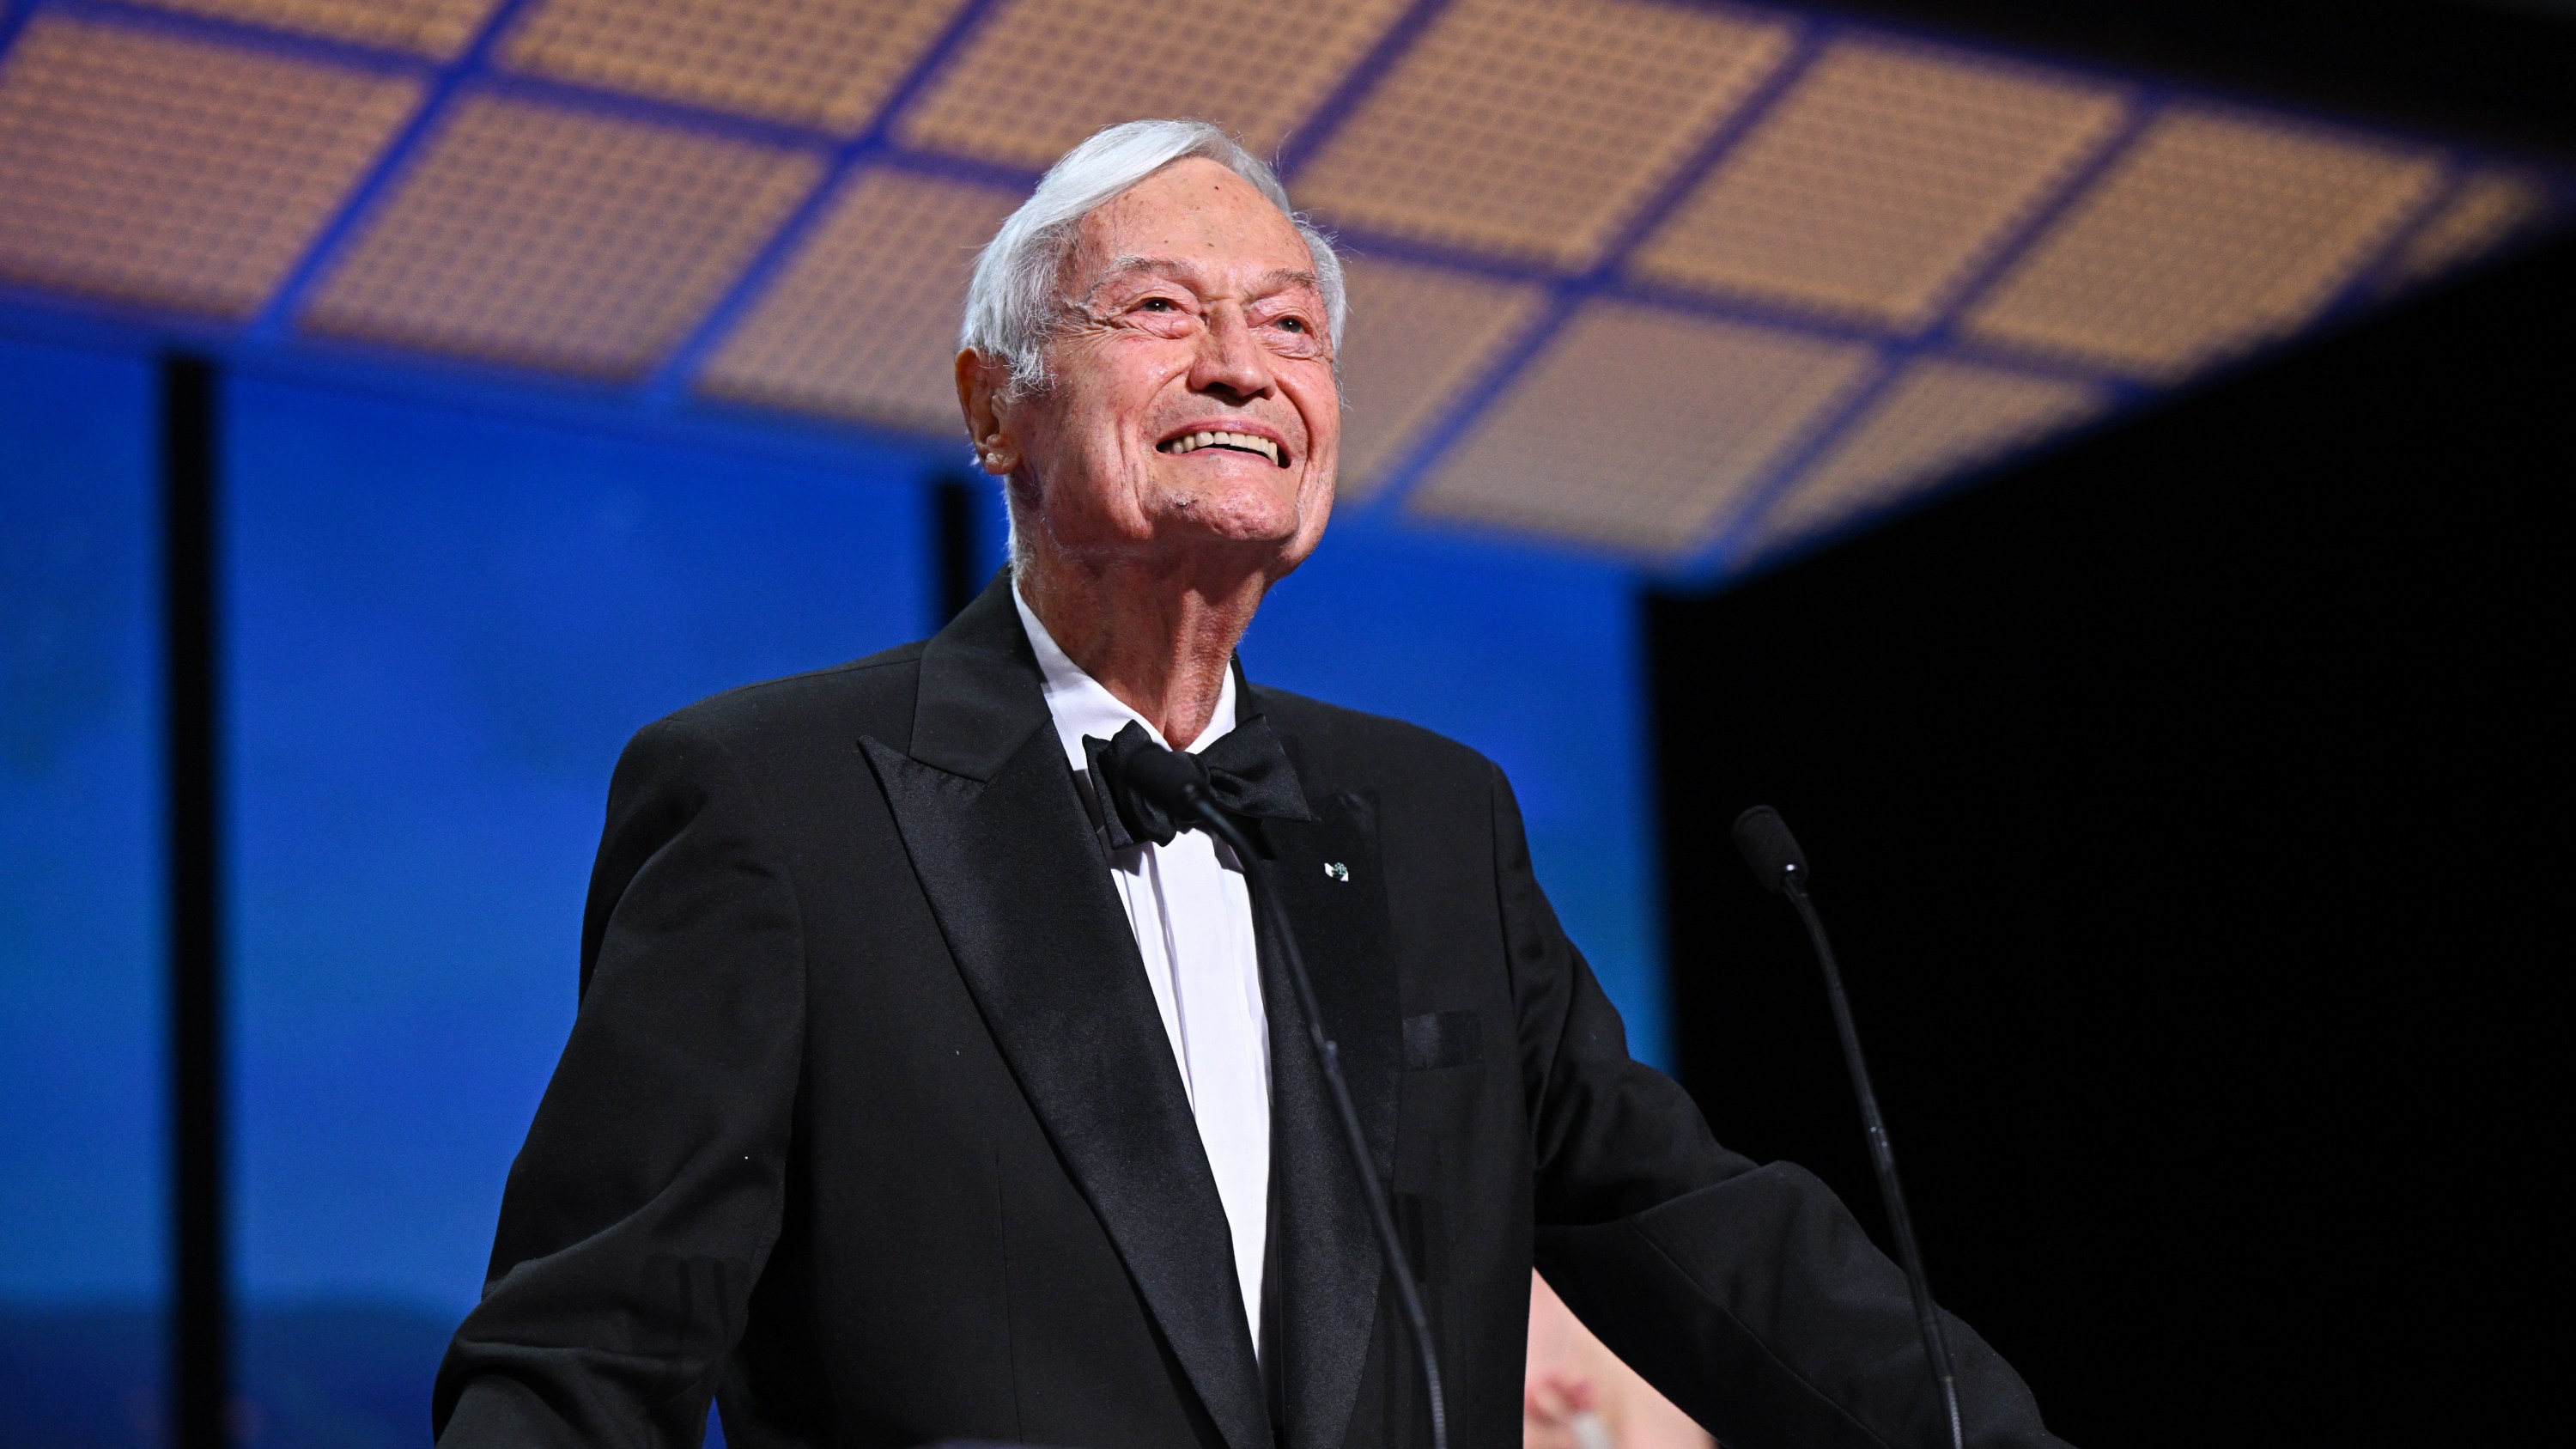 CANNES, FRANCE - MAY 27: Roger Corman present The Grand Prix Award during the closing ceremony during the 76th annual Cannes film festival at Palais des Festivals on May 27, 2023 in Cannes, France. (Photo by Stephane Cardinale - Corbis/Corbis via Getty Images)